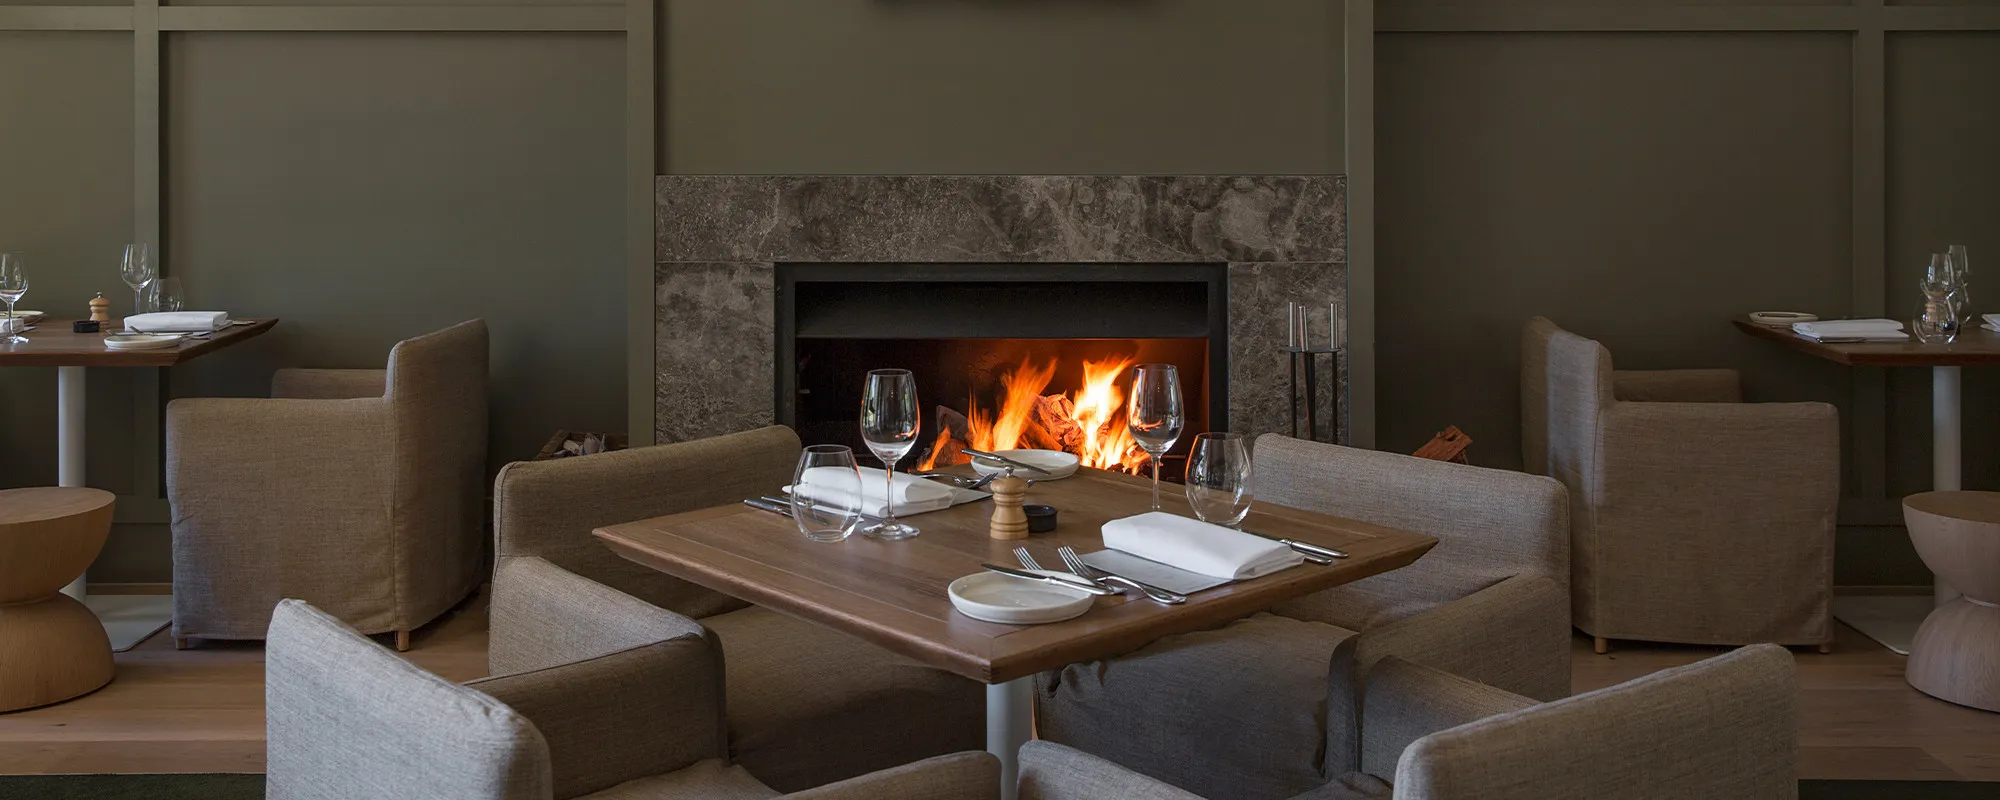 Lancemore Lindenderry Red Hill Boutique Luxury Accommodation Melbourne Food The Dining Room 2000 x 800 9 v2